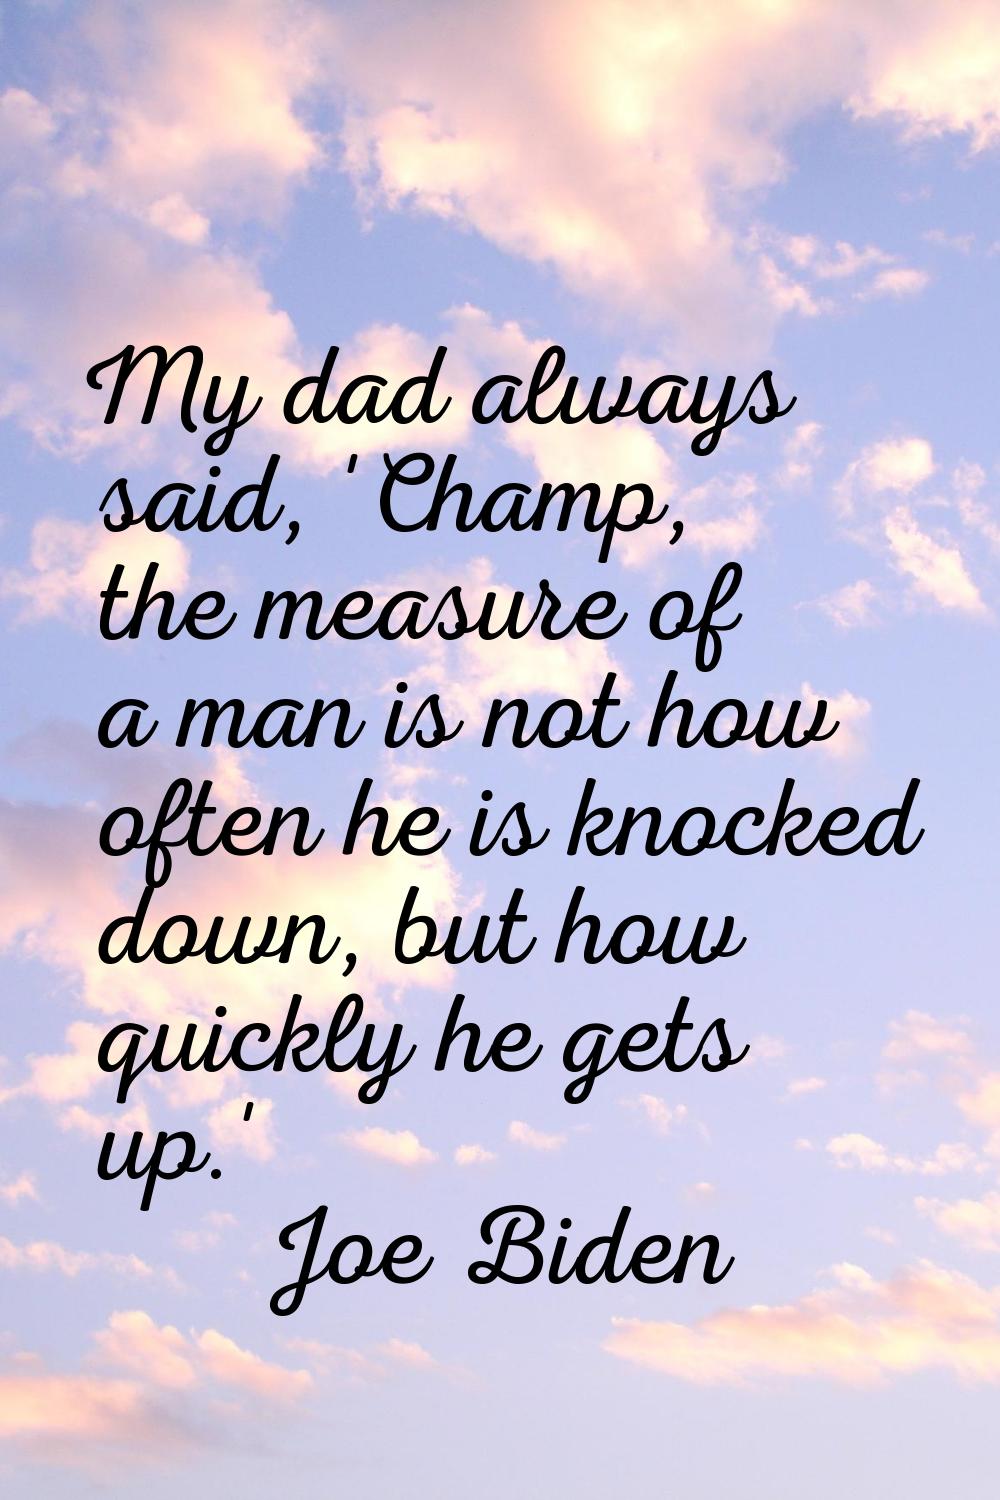 My dad always said, 'Champ, the measure of a man is not how often he is knocked down, but how quick